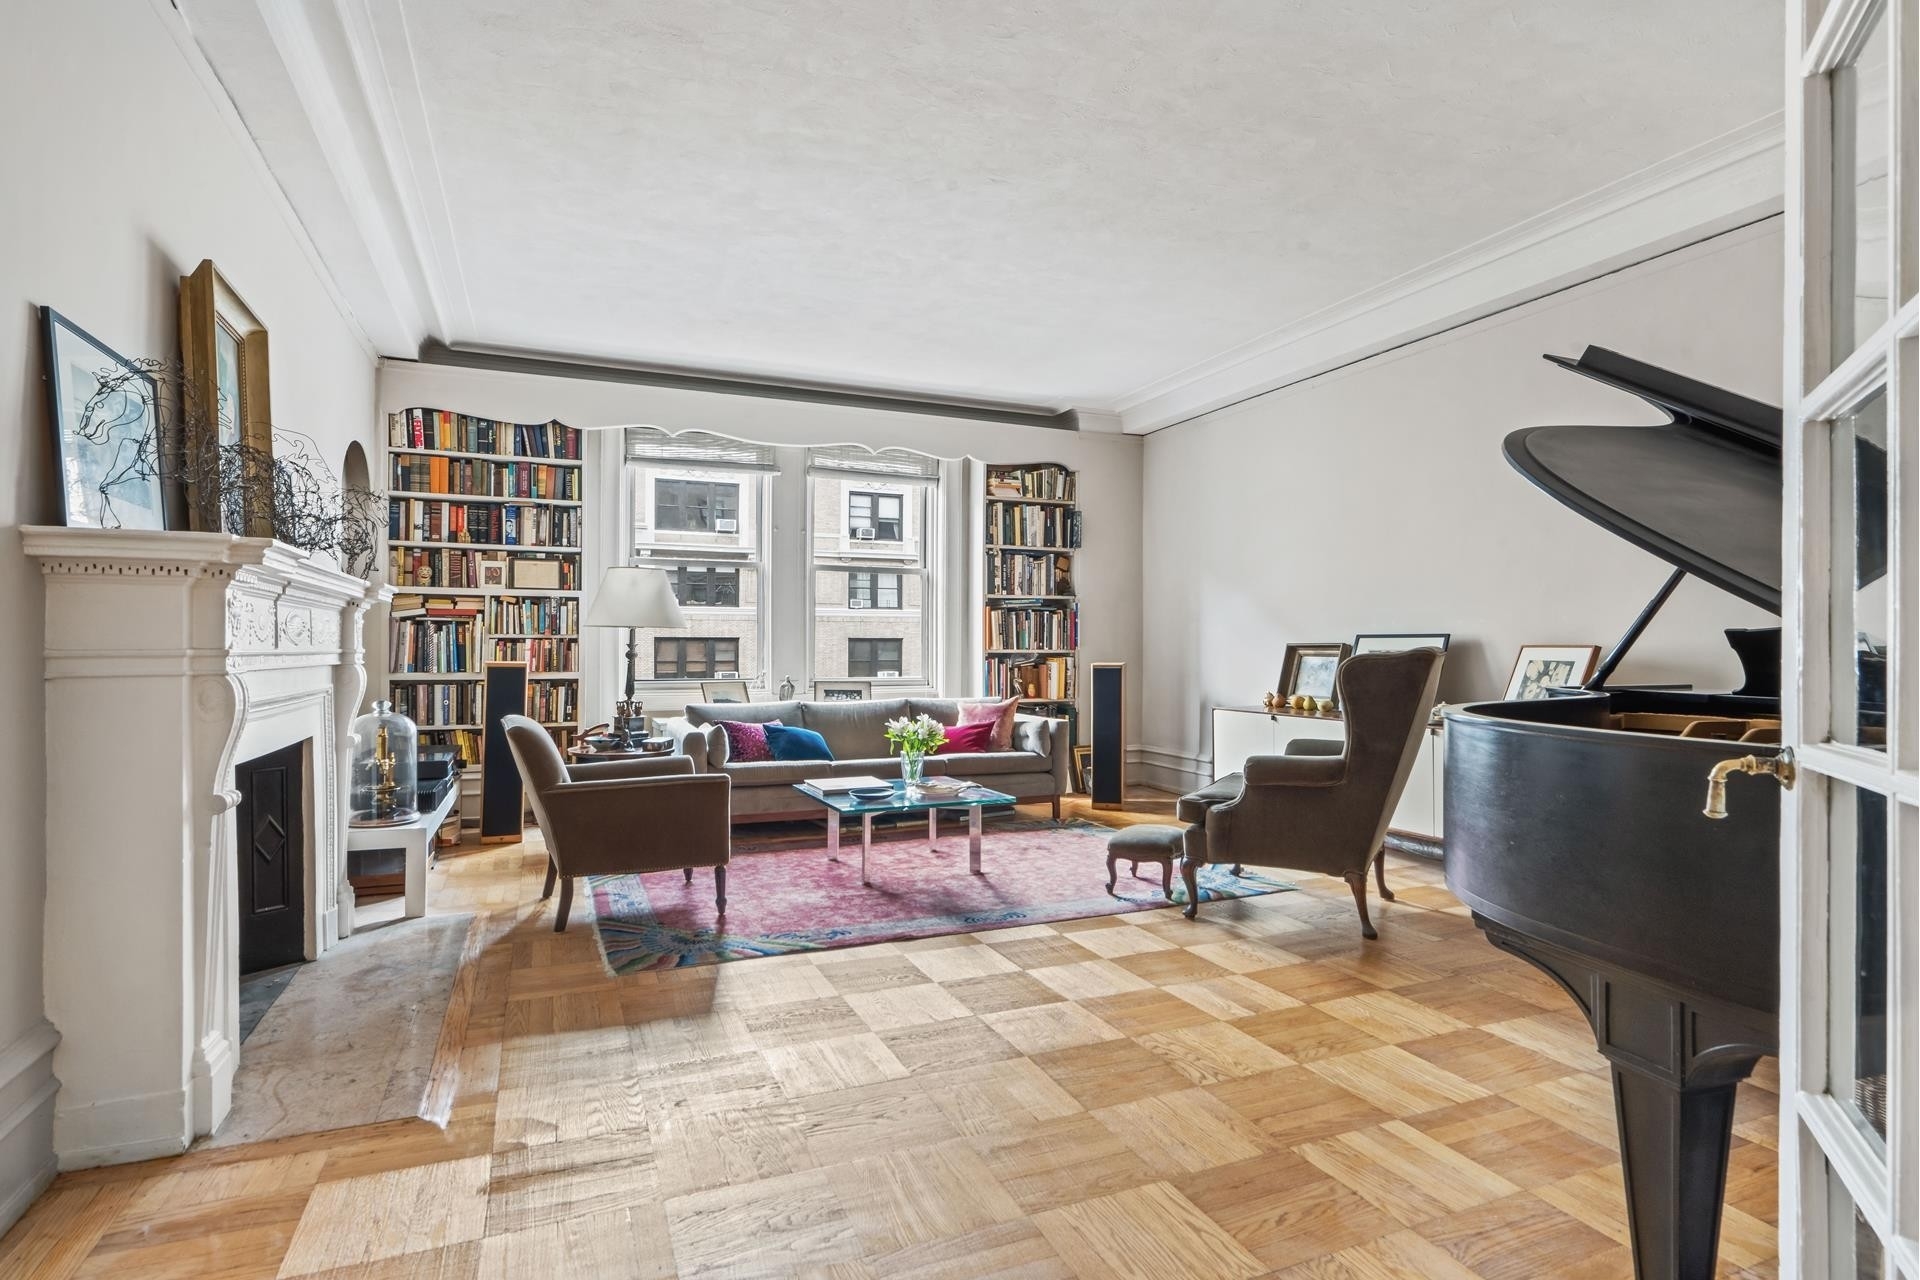 Co-op Properties for Sale at 151 W 86TH ST, 9C Upper West Side, New York, NY 10024